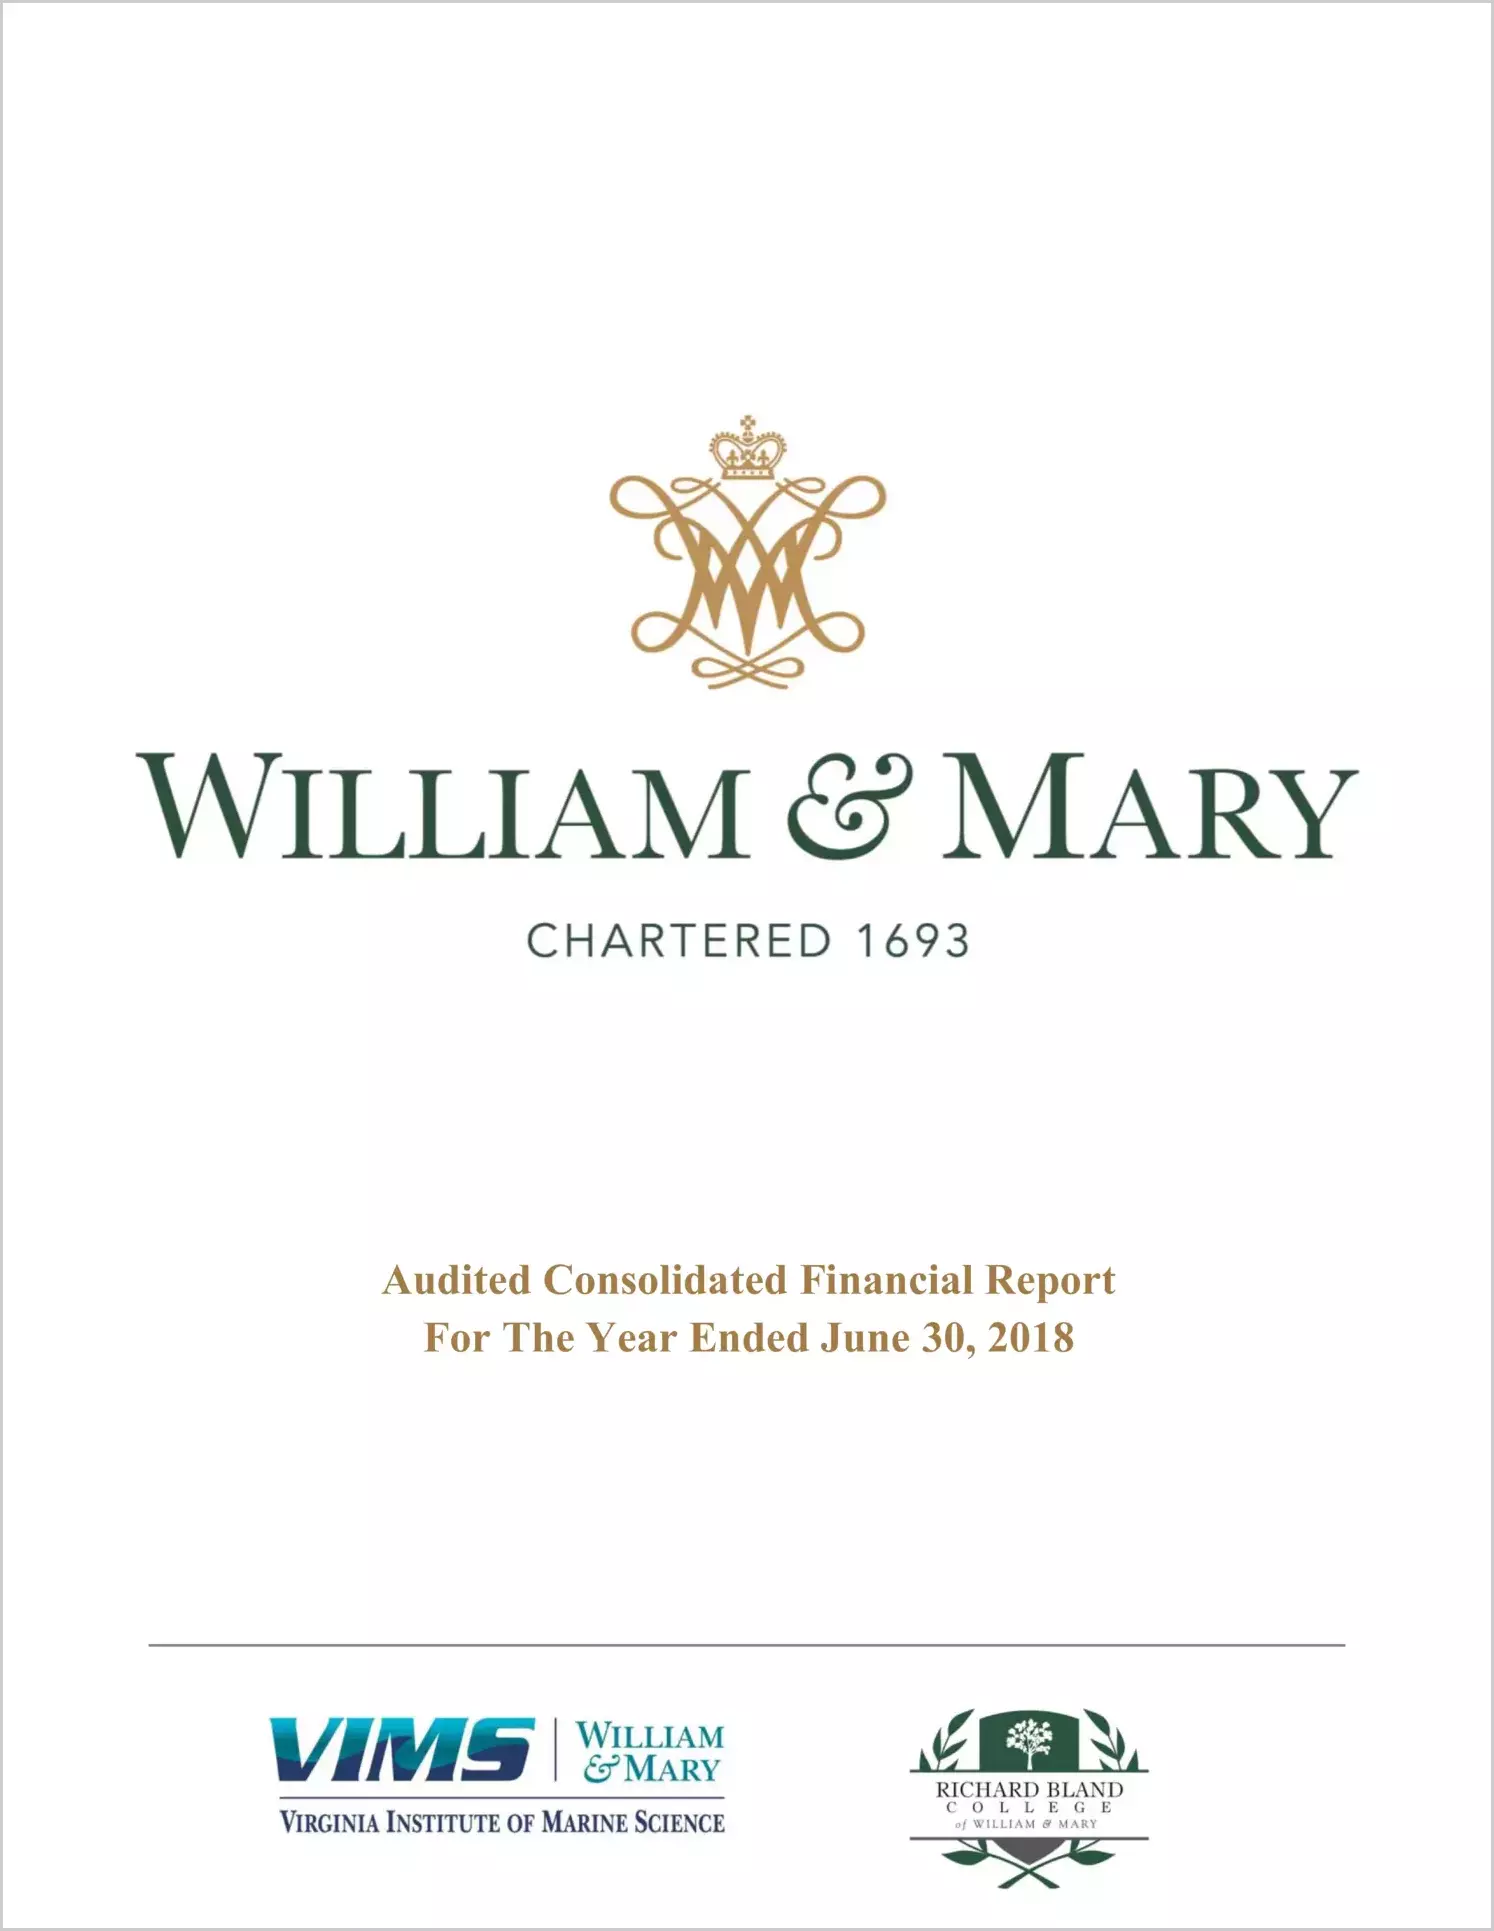 William & Mary, Virginia Institute of Marine Science, and Richard Bland College Financial Statements for the year ended June 30, 2018